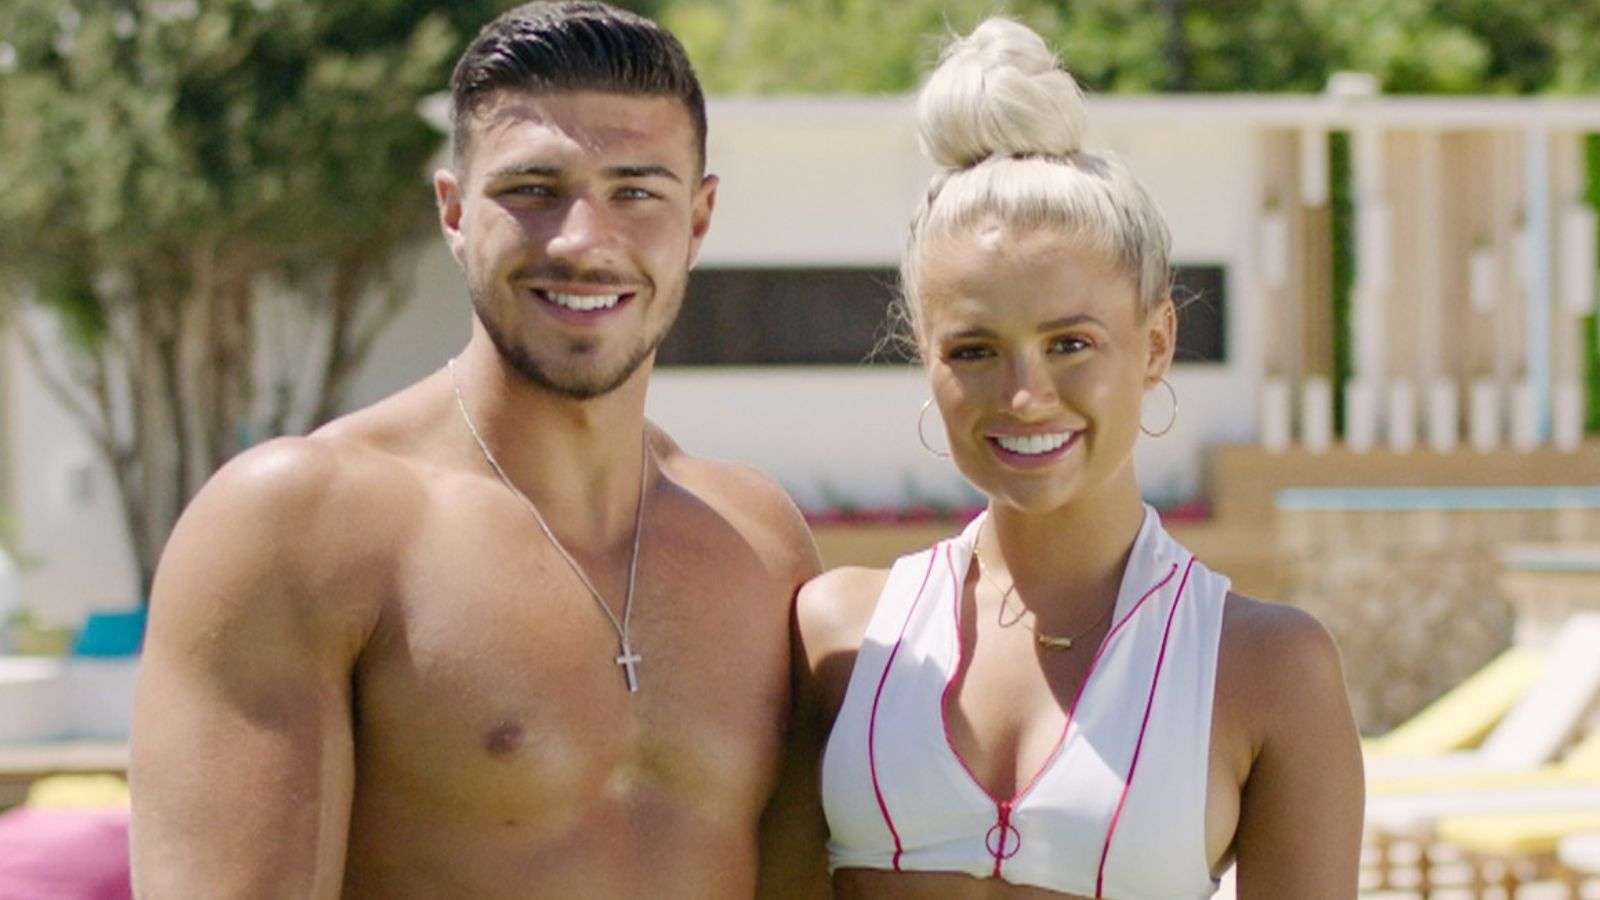 Molly Mae and Tommy Fury from Love Island